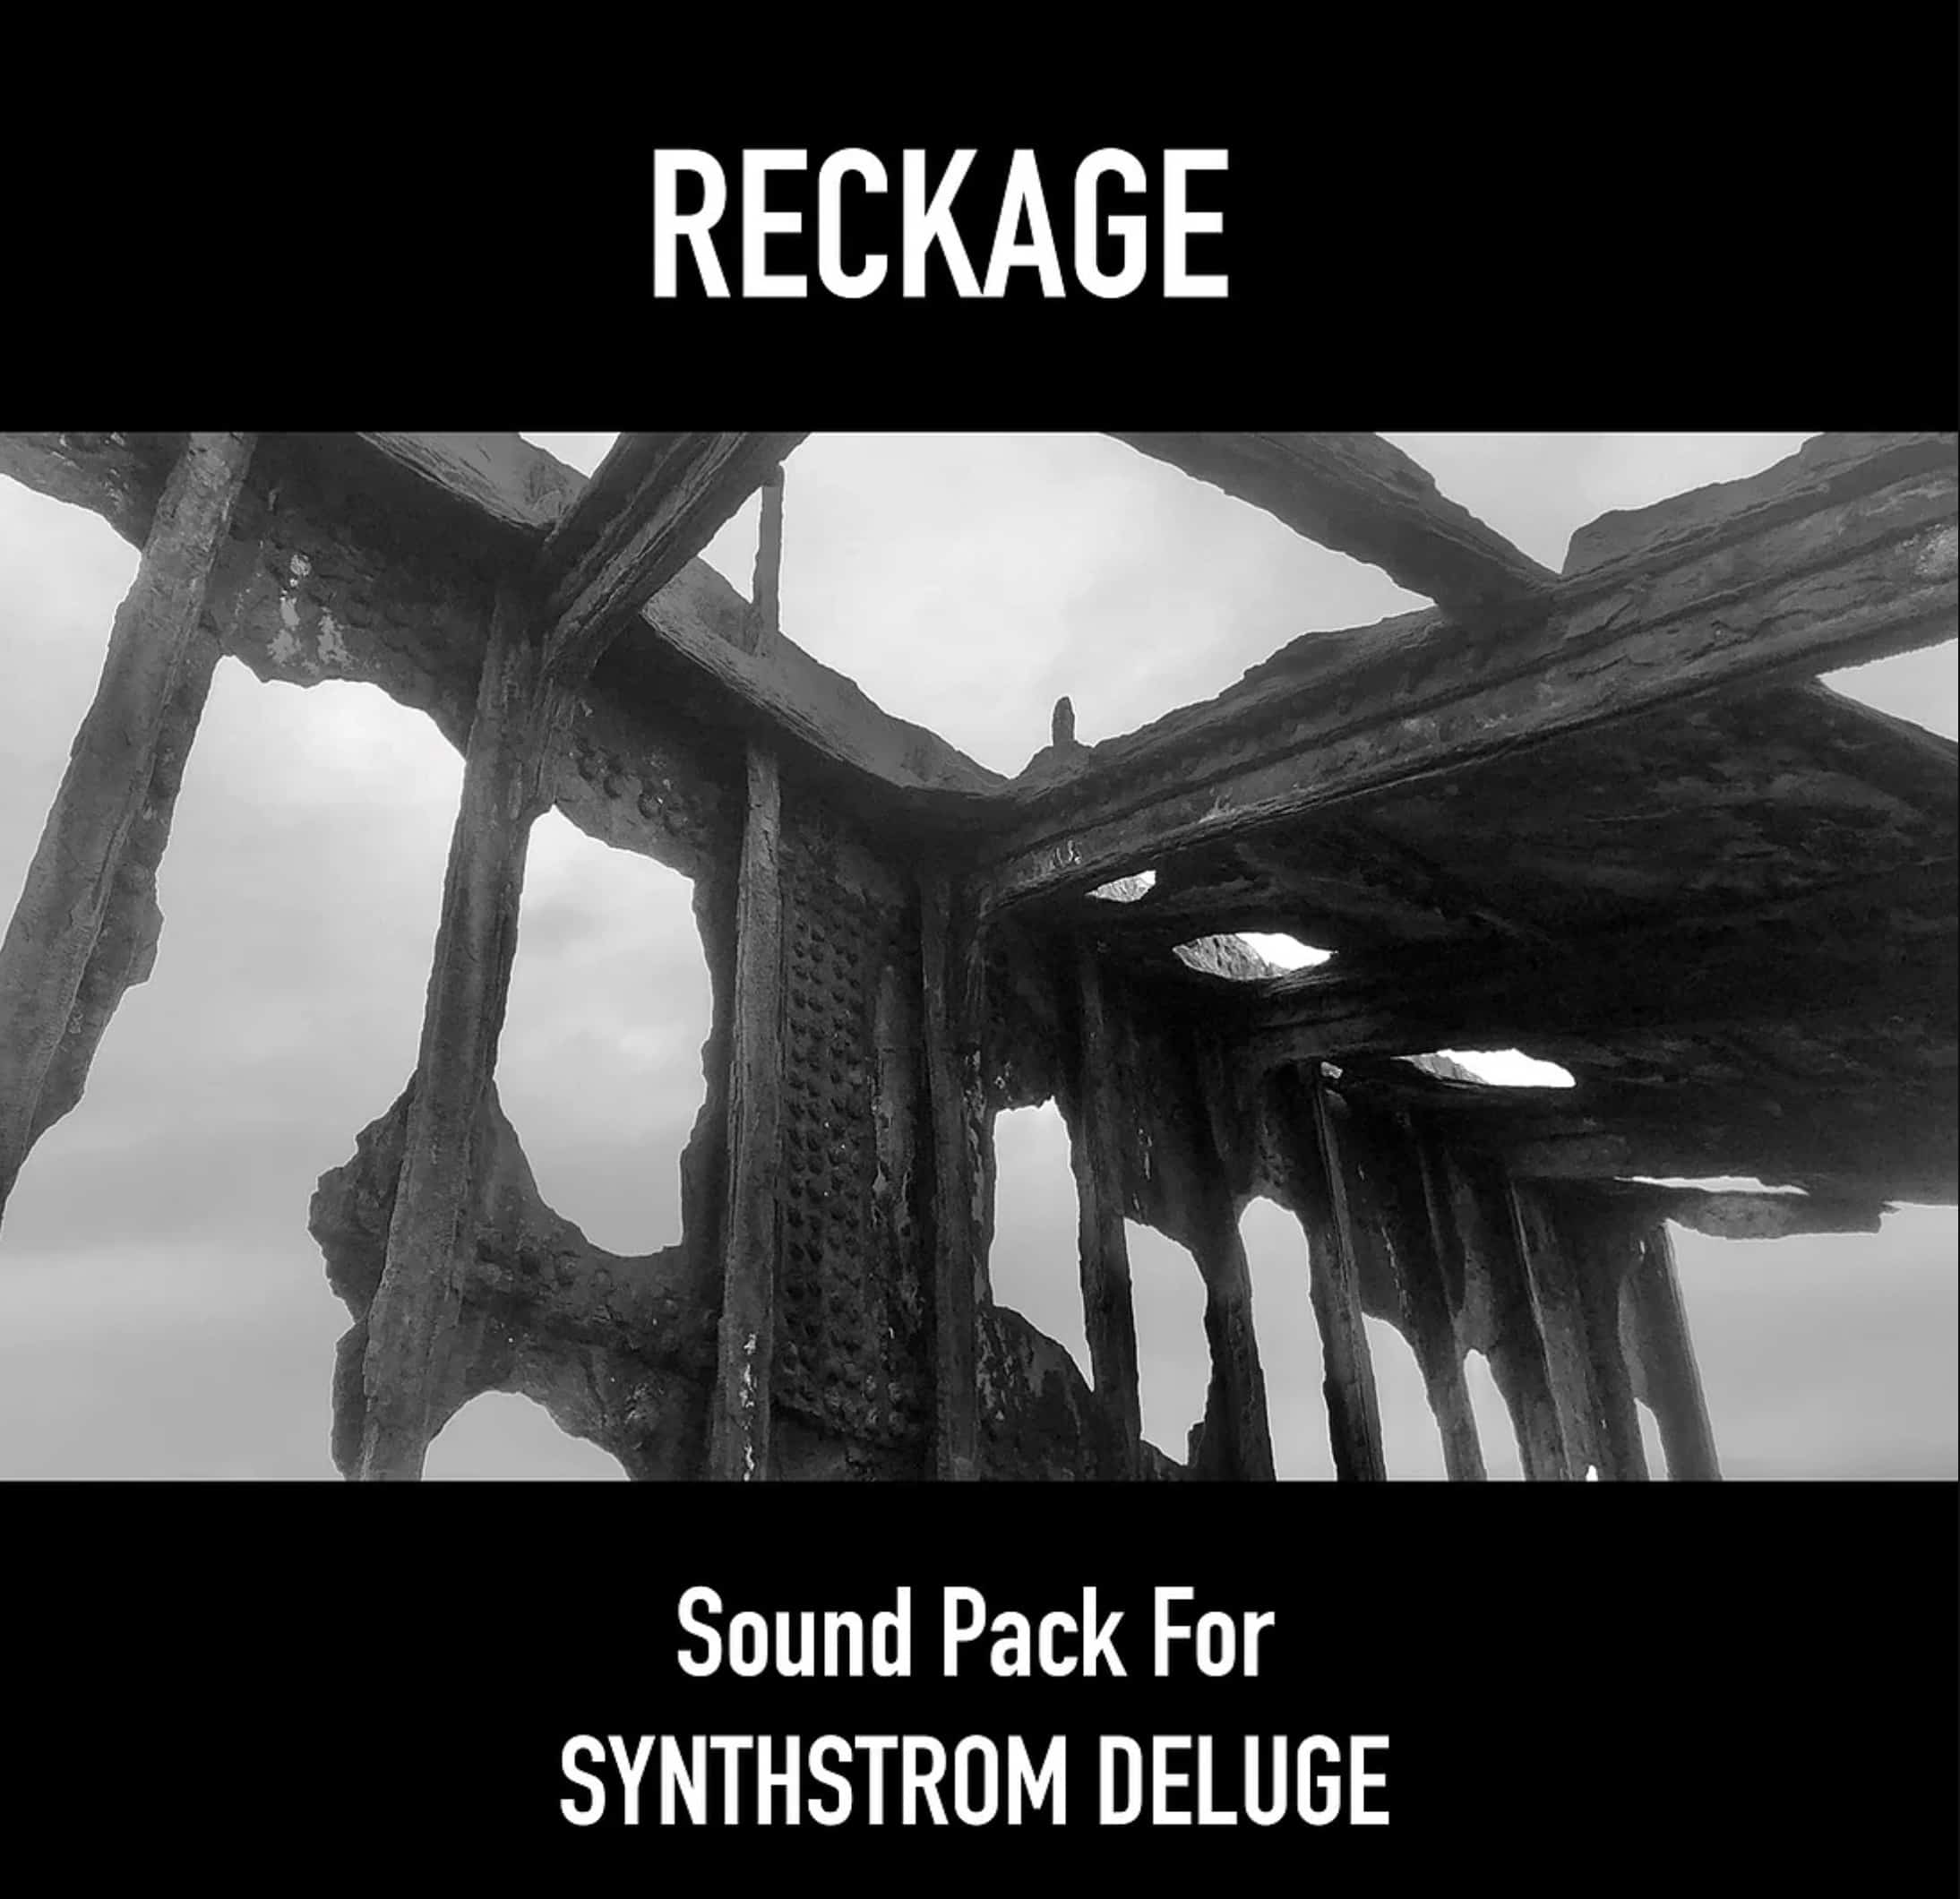 22Reckage22-Dark-Ambient-Sound-Pack-for-Synthstrom-Deluge